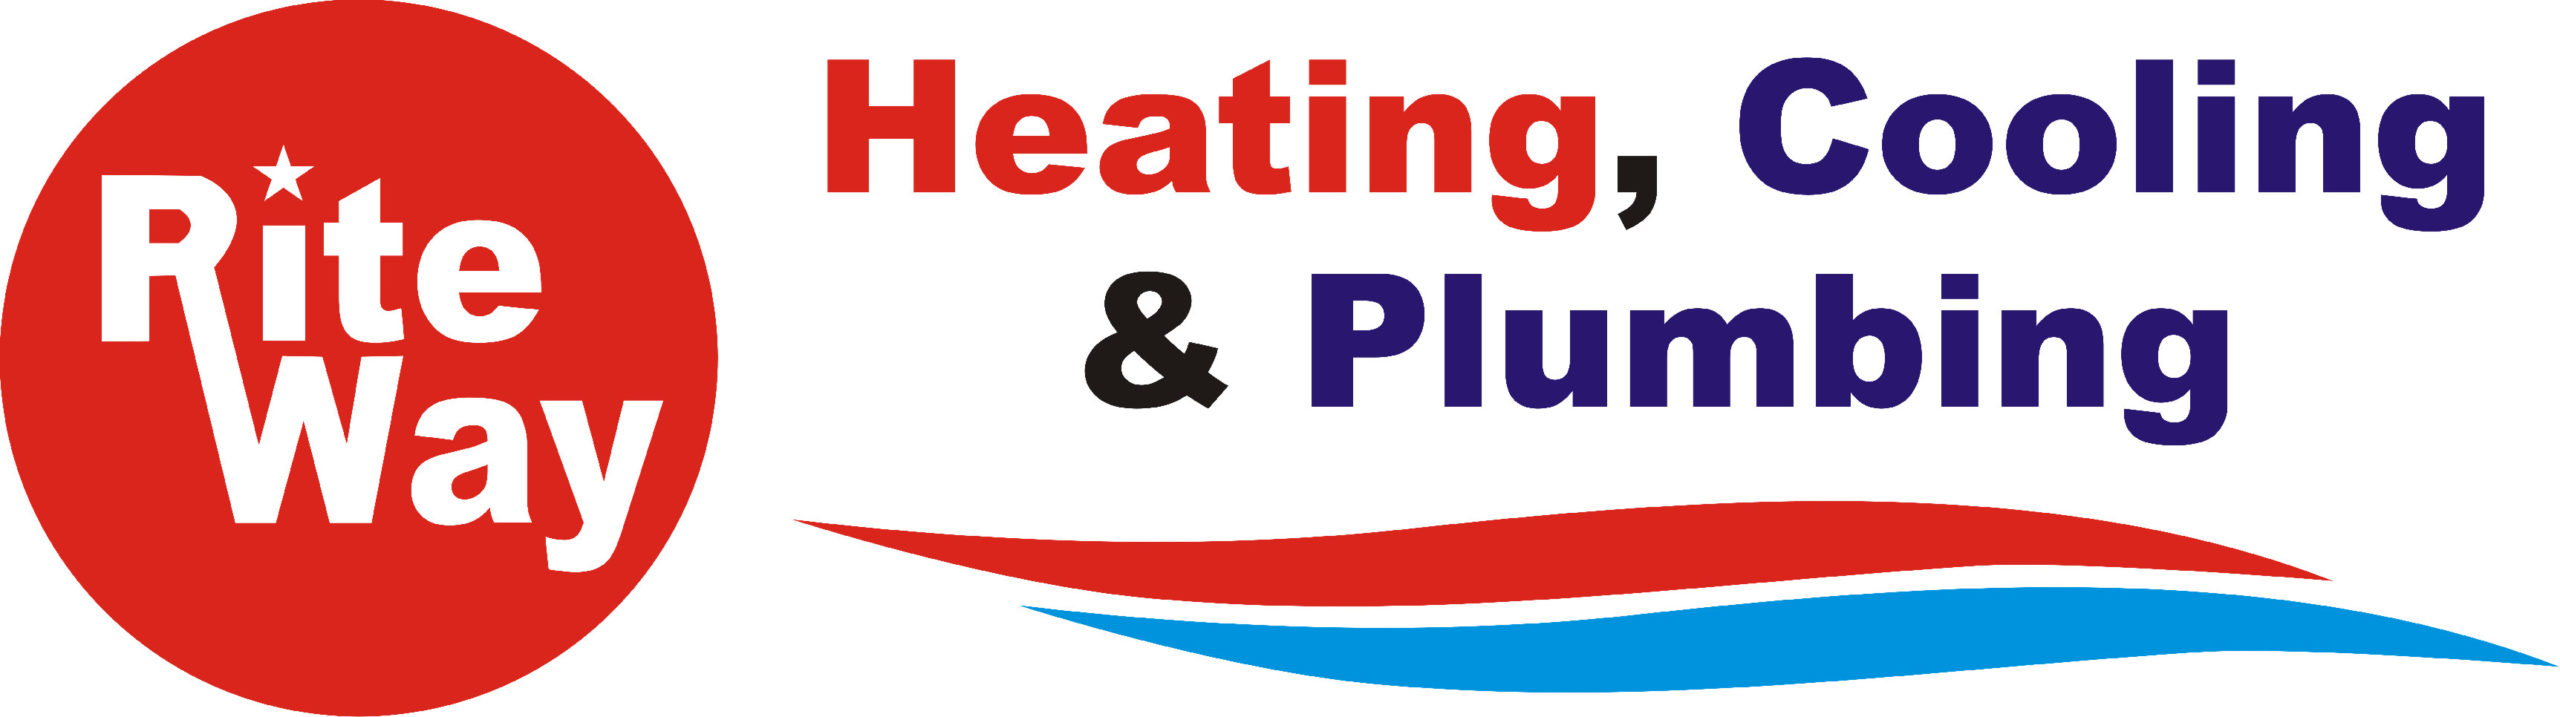 Rite Way Heating, Cooling, and Plumbing